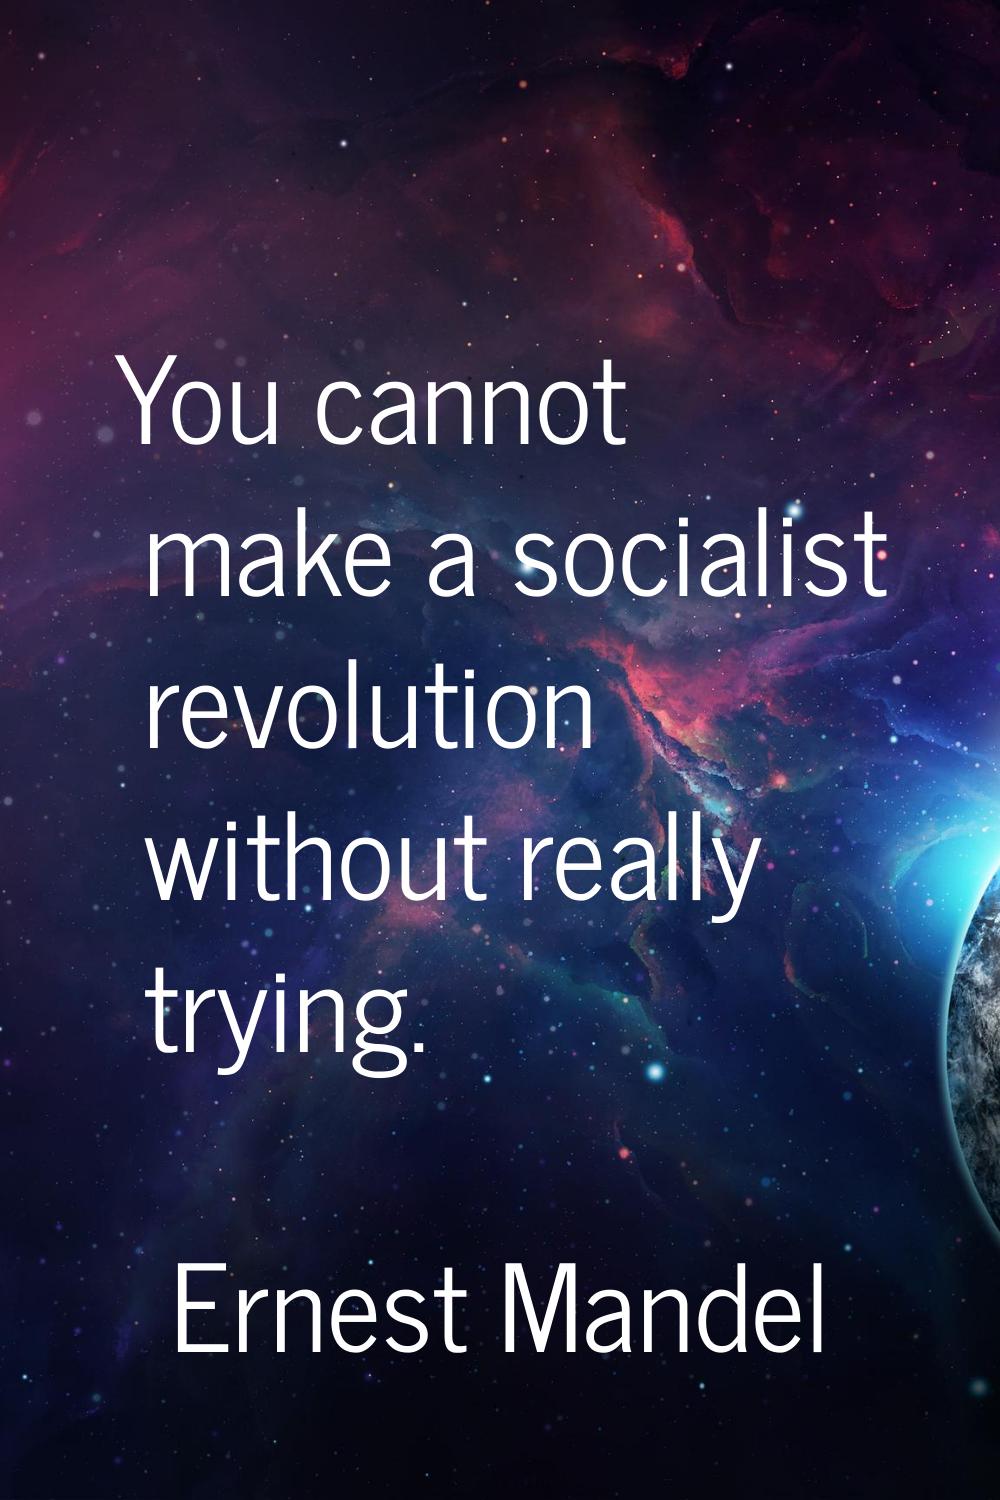 You cannot make a socialist revolution without really trying.